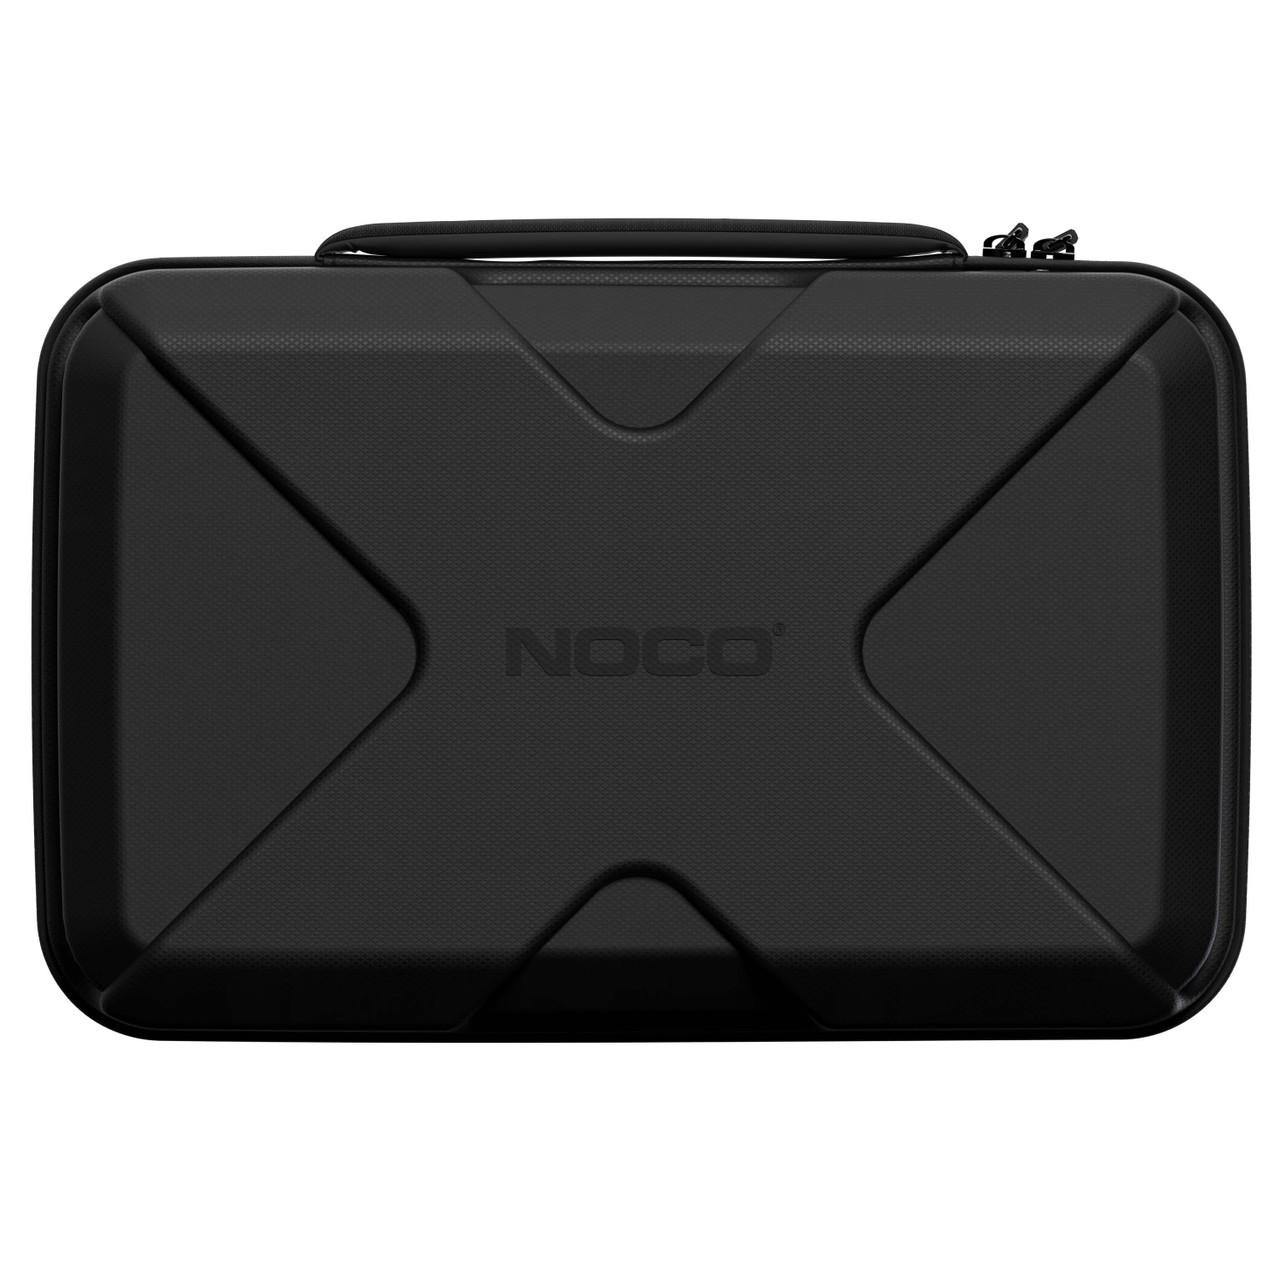 https://cdn11.bigcommerce.com/s-la3x1l1m81/images/stencil/1280x1280/products/231753/228724/noco-noco-boost-x-eva-protection-case-for-gbx155-ultrasafe-lithium-jump-starter__68007.1694417714.jpg?c=1